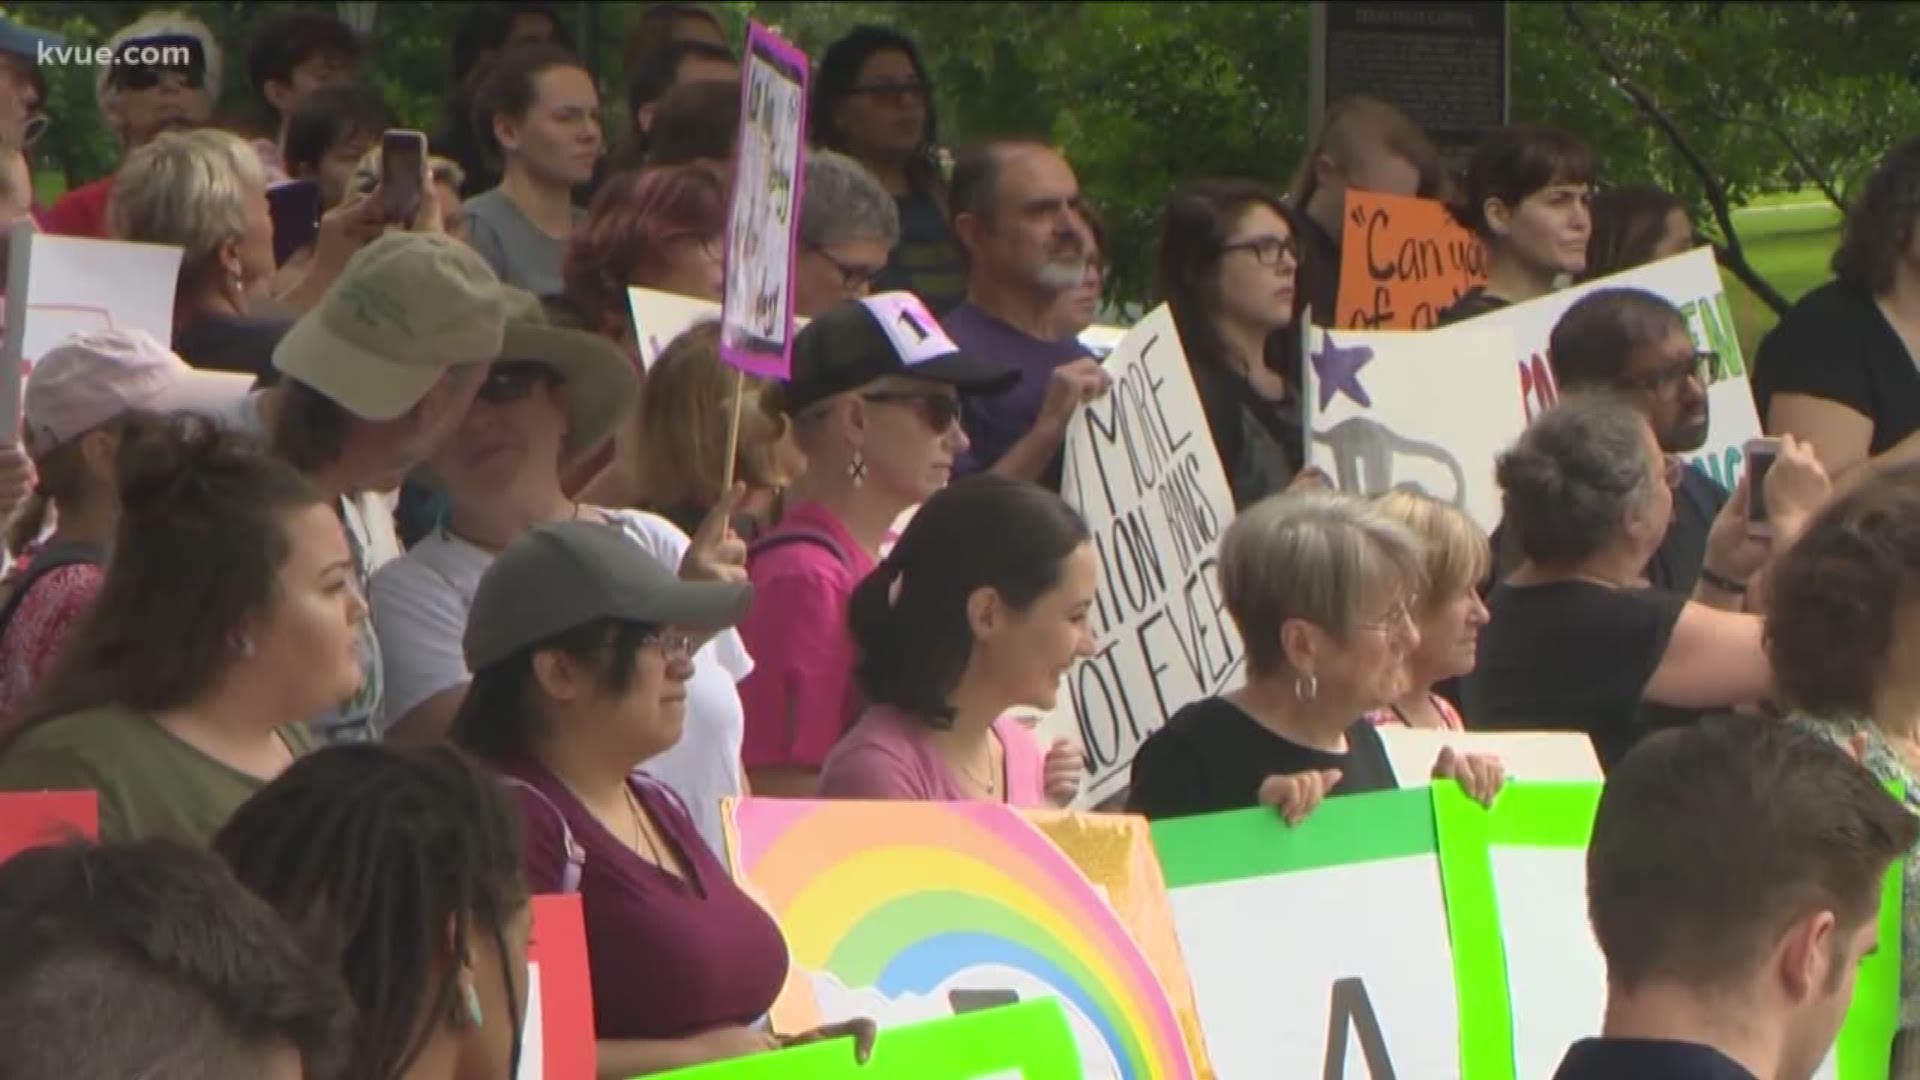 New abortion laws have led to national rallies to be held including right here in Austin.